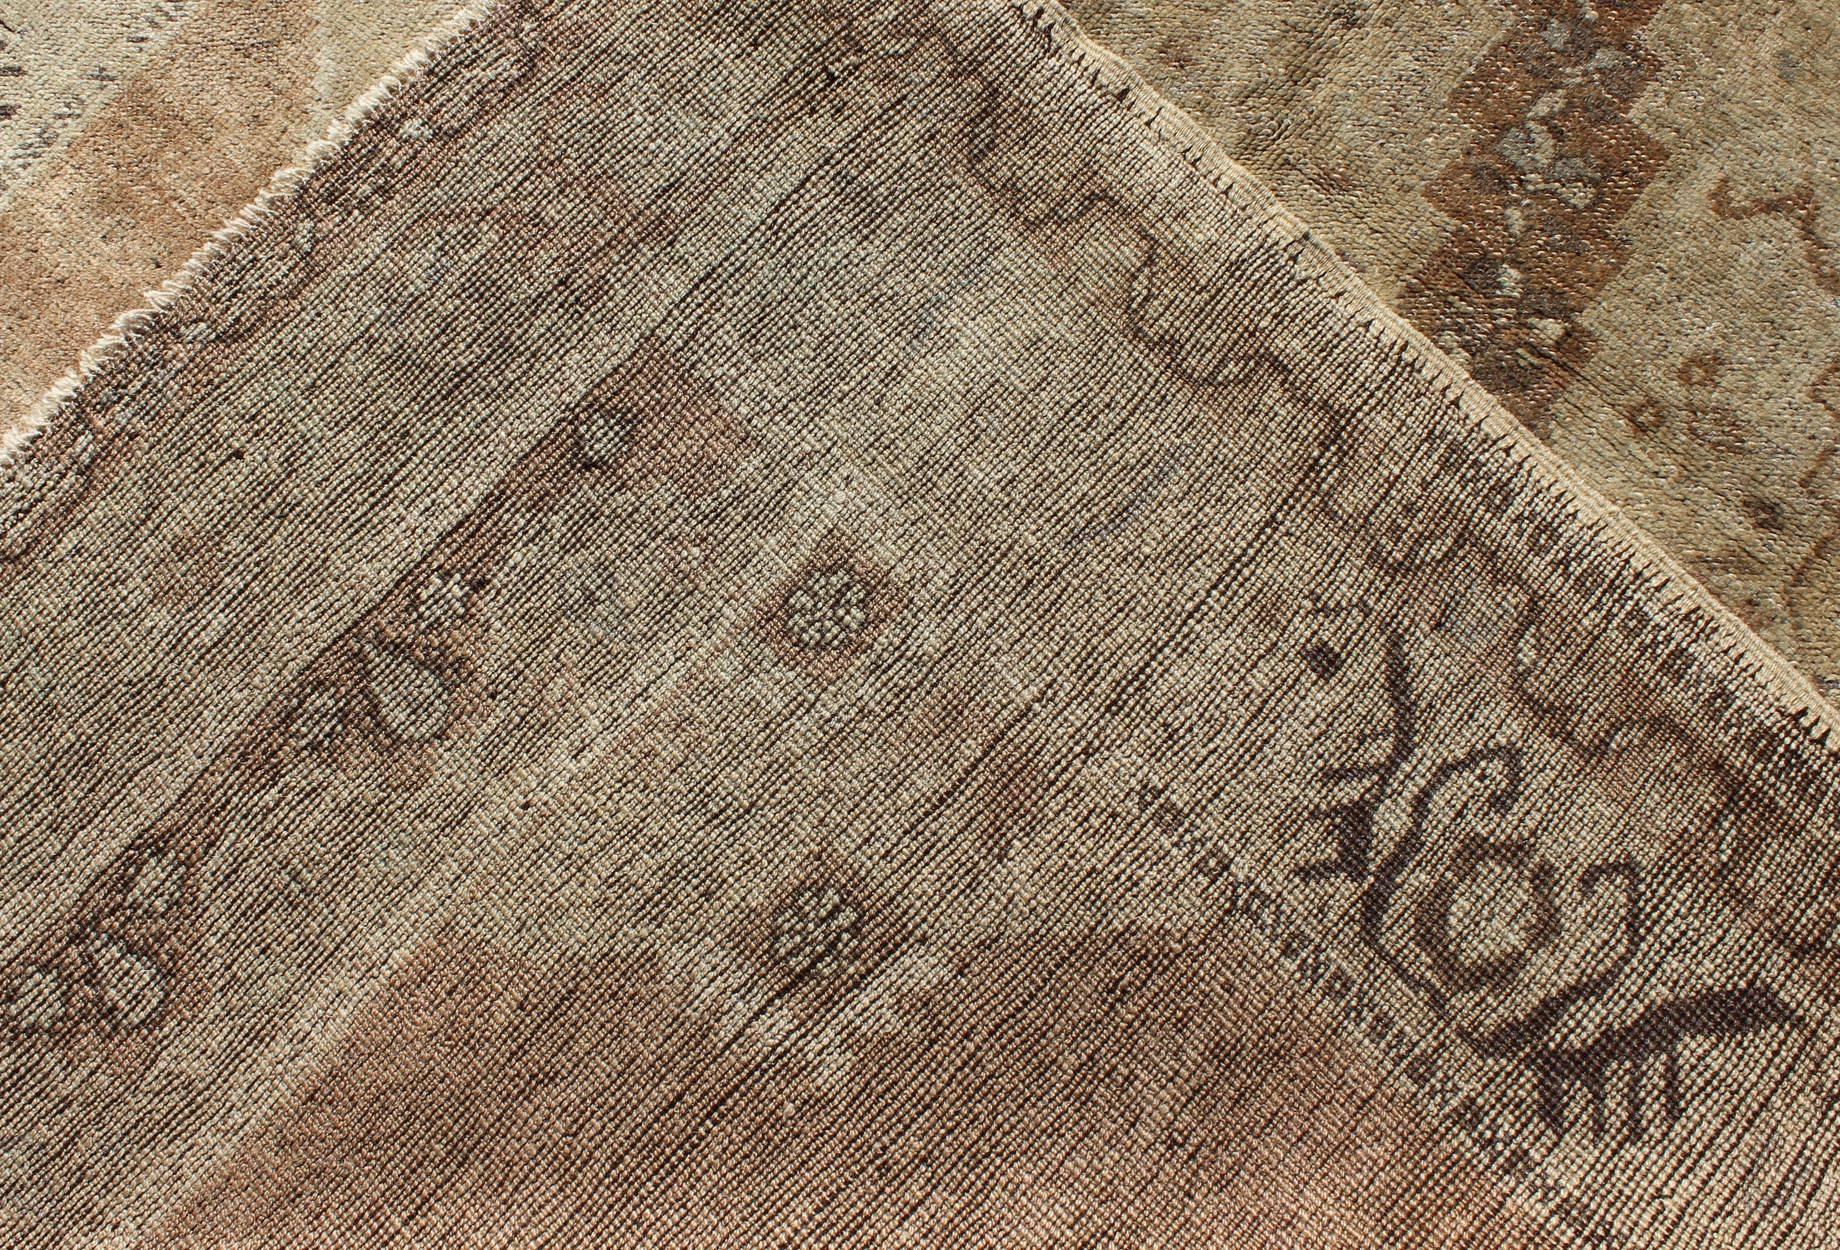 Mid-20th Century Vintage Oushak Rug with Neutral Colors